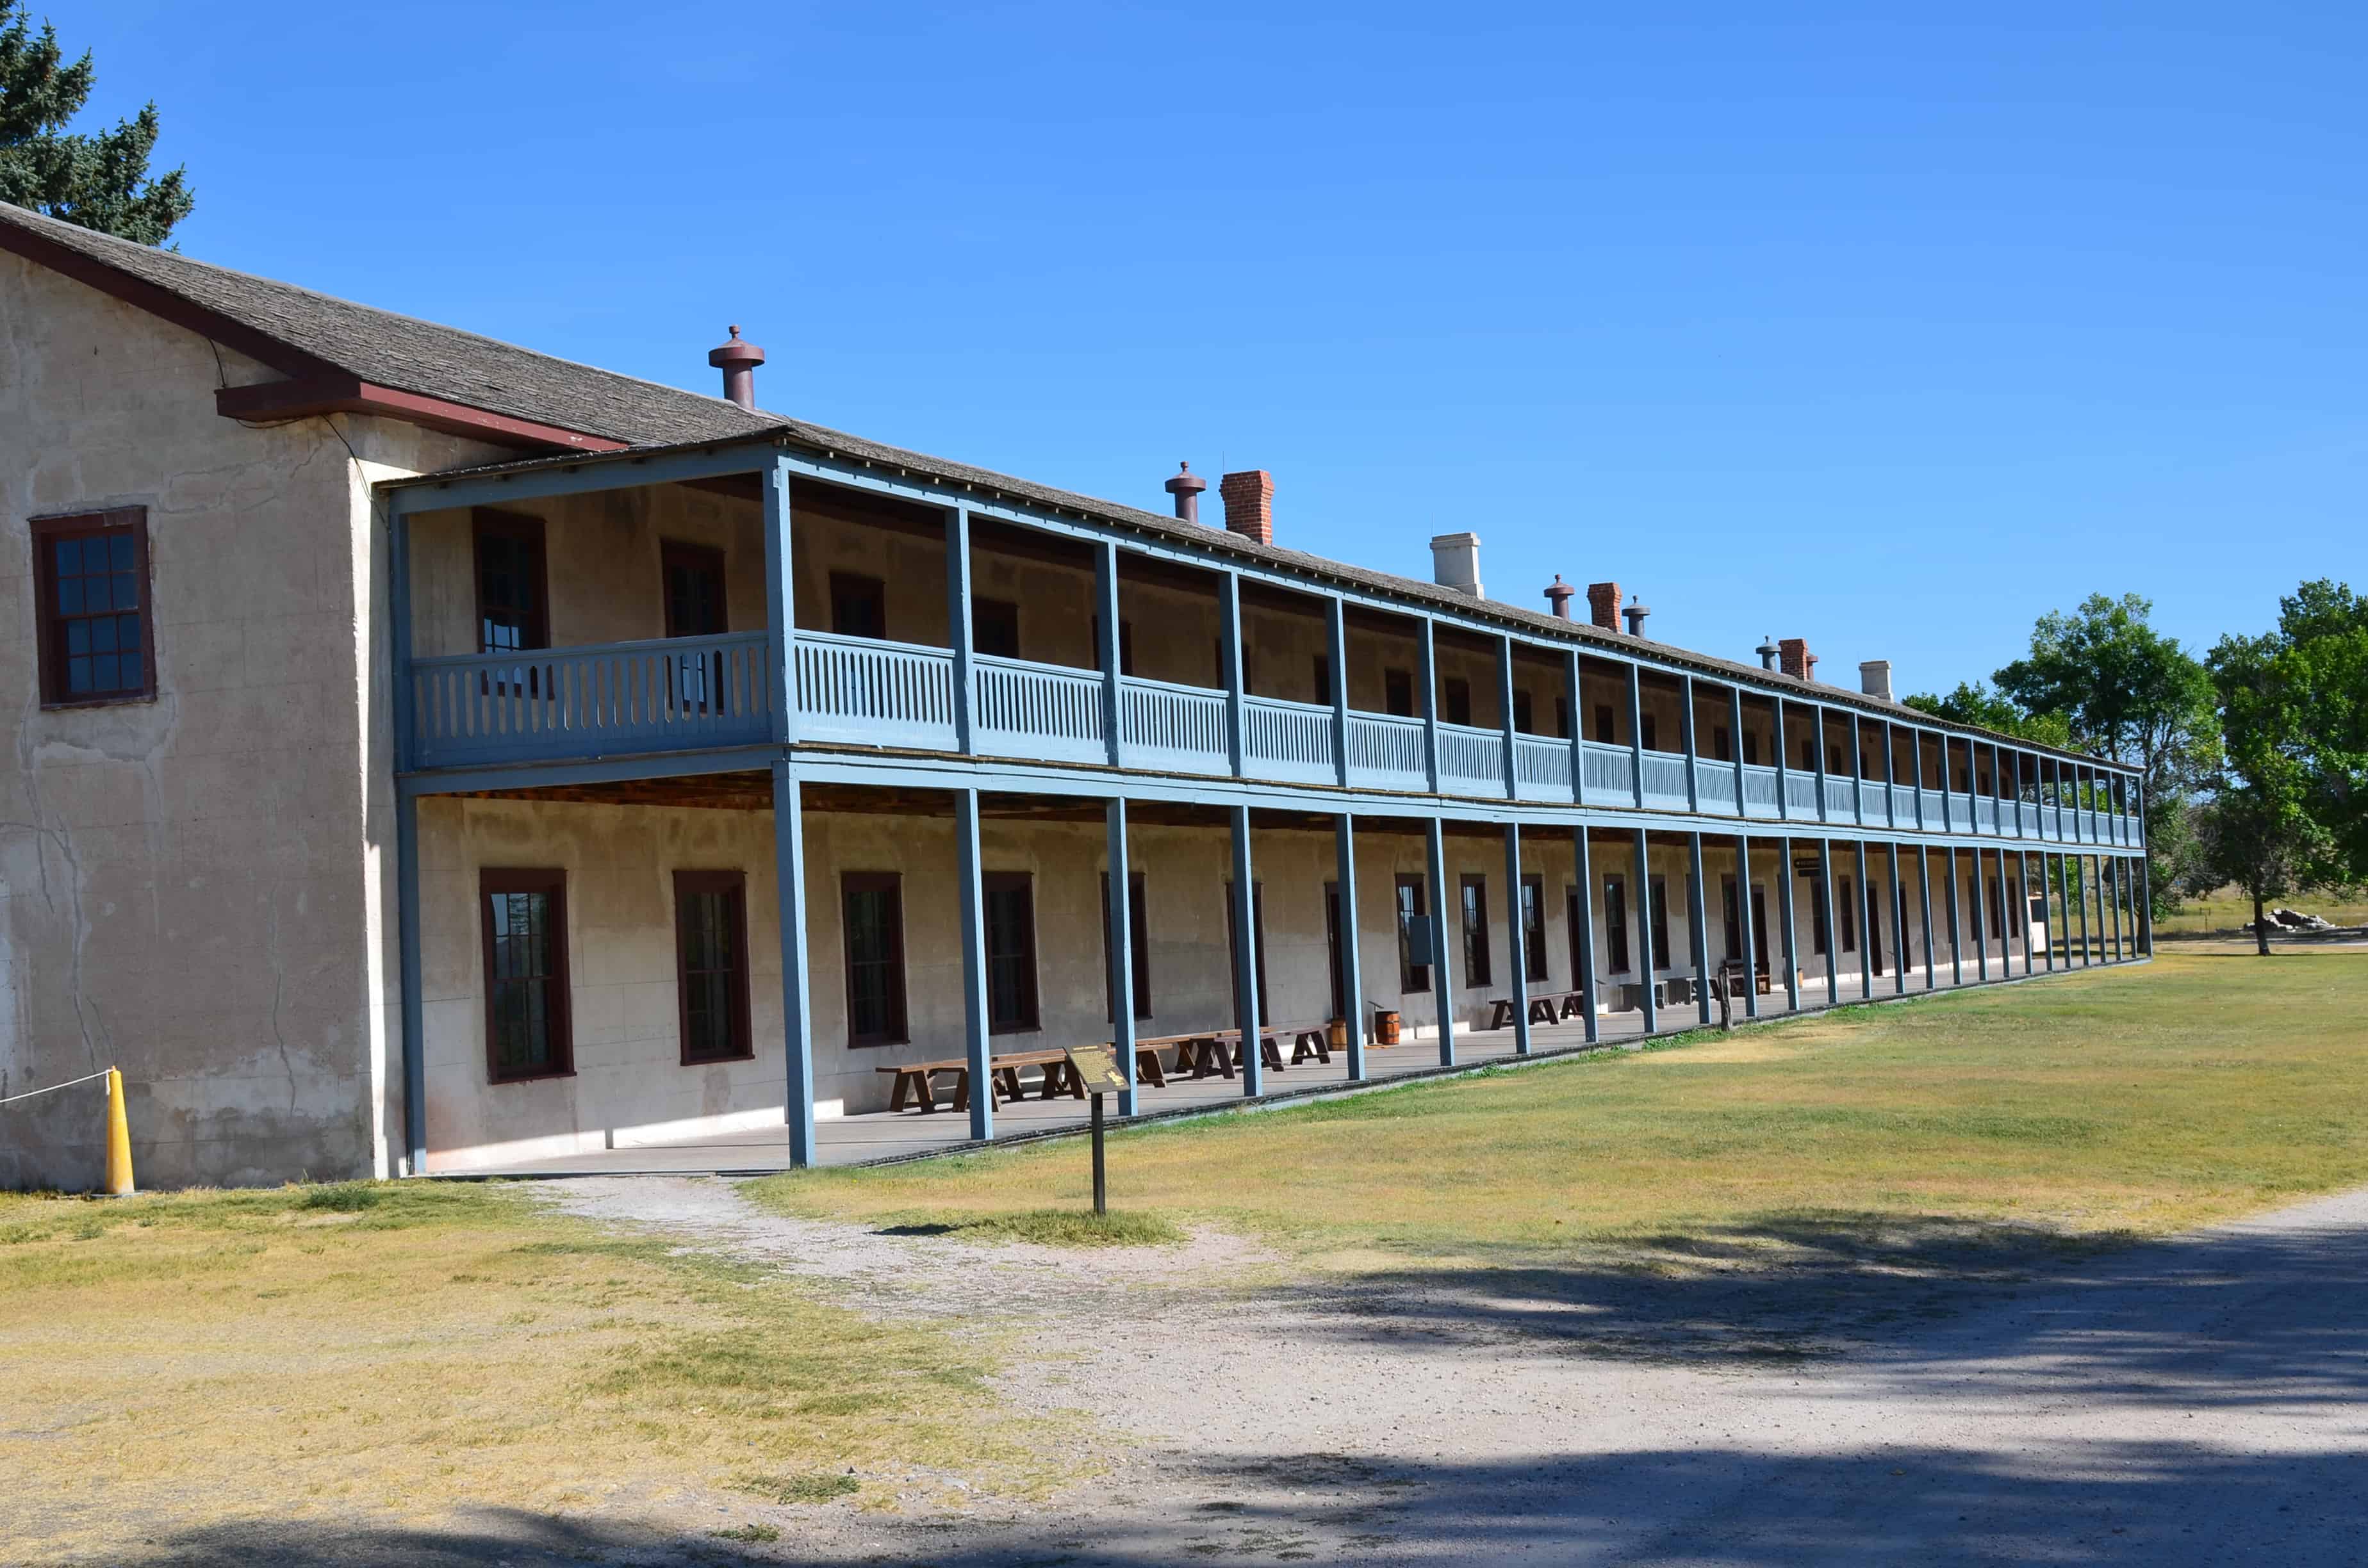 Cavalry barracks at Fort Laramie National Historic Site in Wyoming